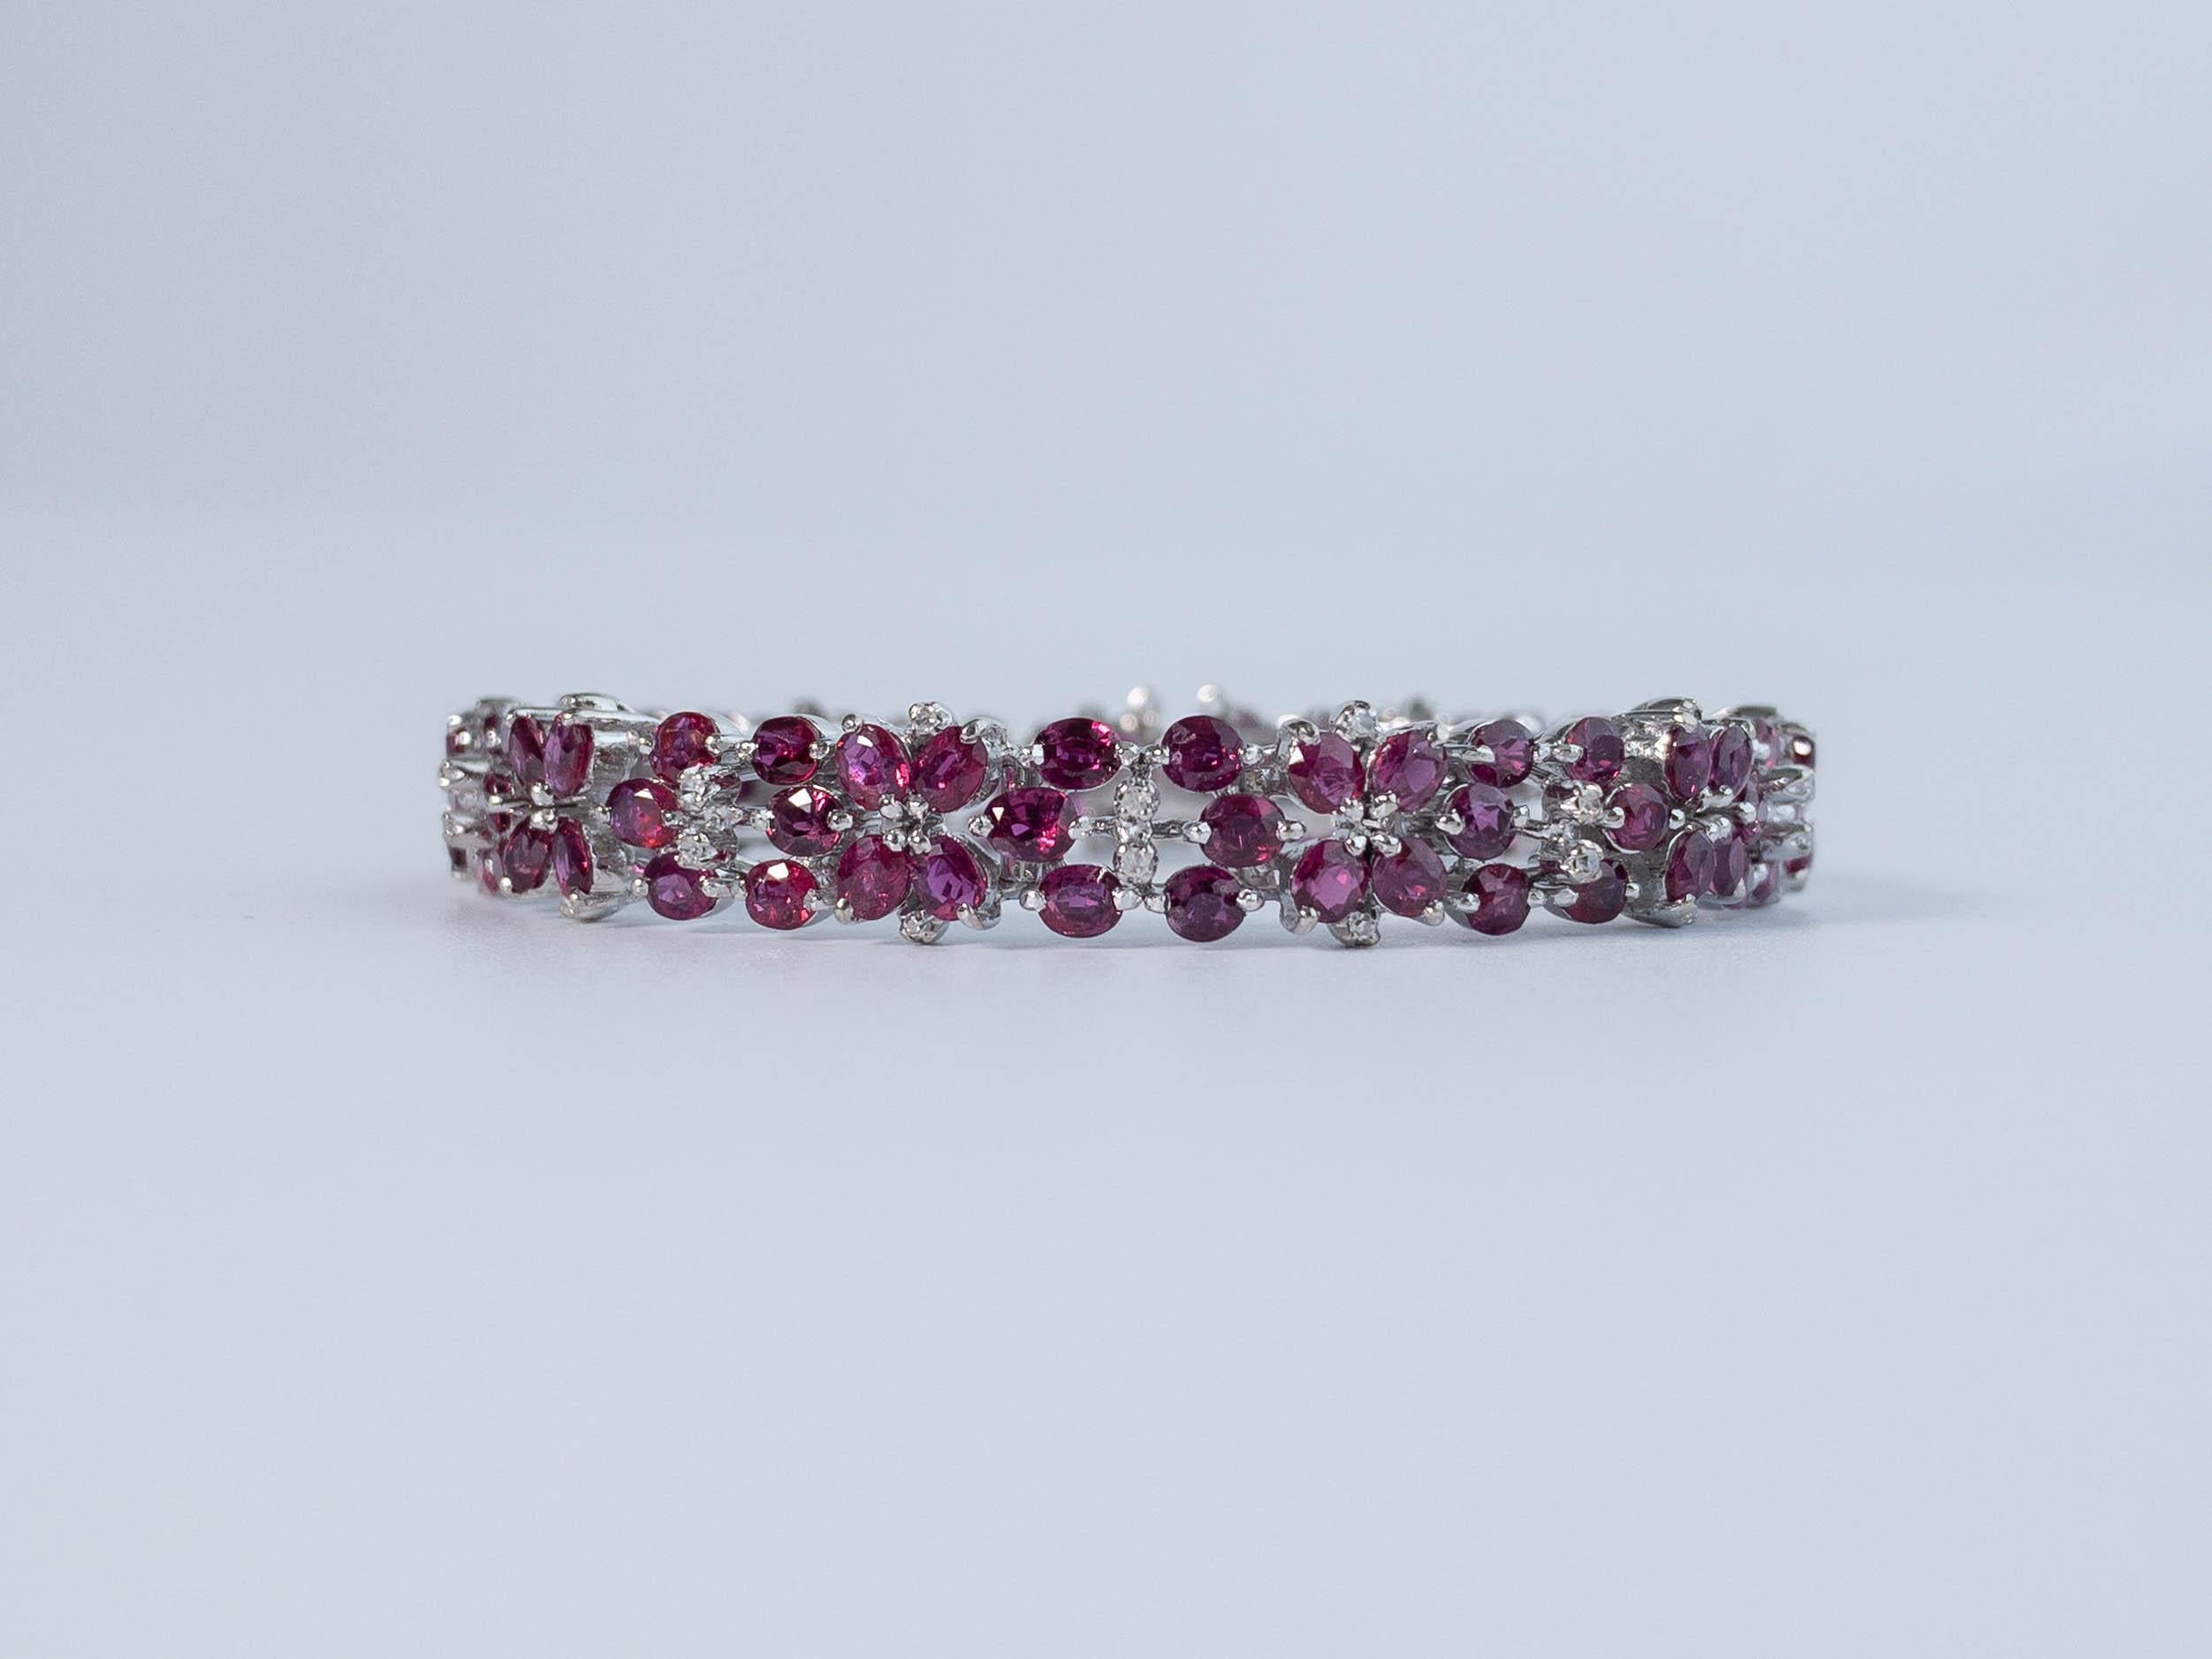 This sweet vintage ruby and white gold bracelet displays a lovely floral pattern. A total of 110 oval shaped rubies are clustered together in a repeating pattern of flowers. Set in white gold, this bracelet is sprinkled throughout with white baby